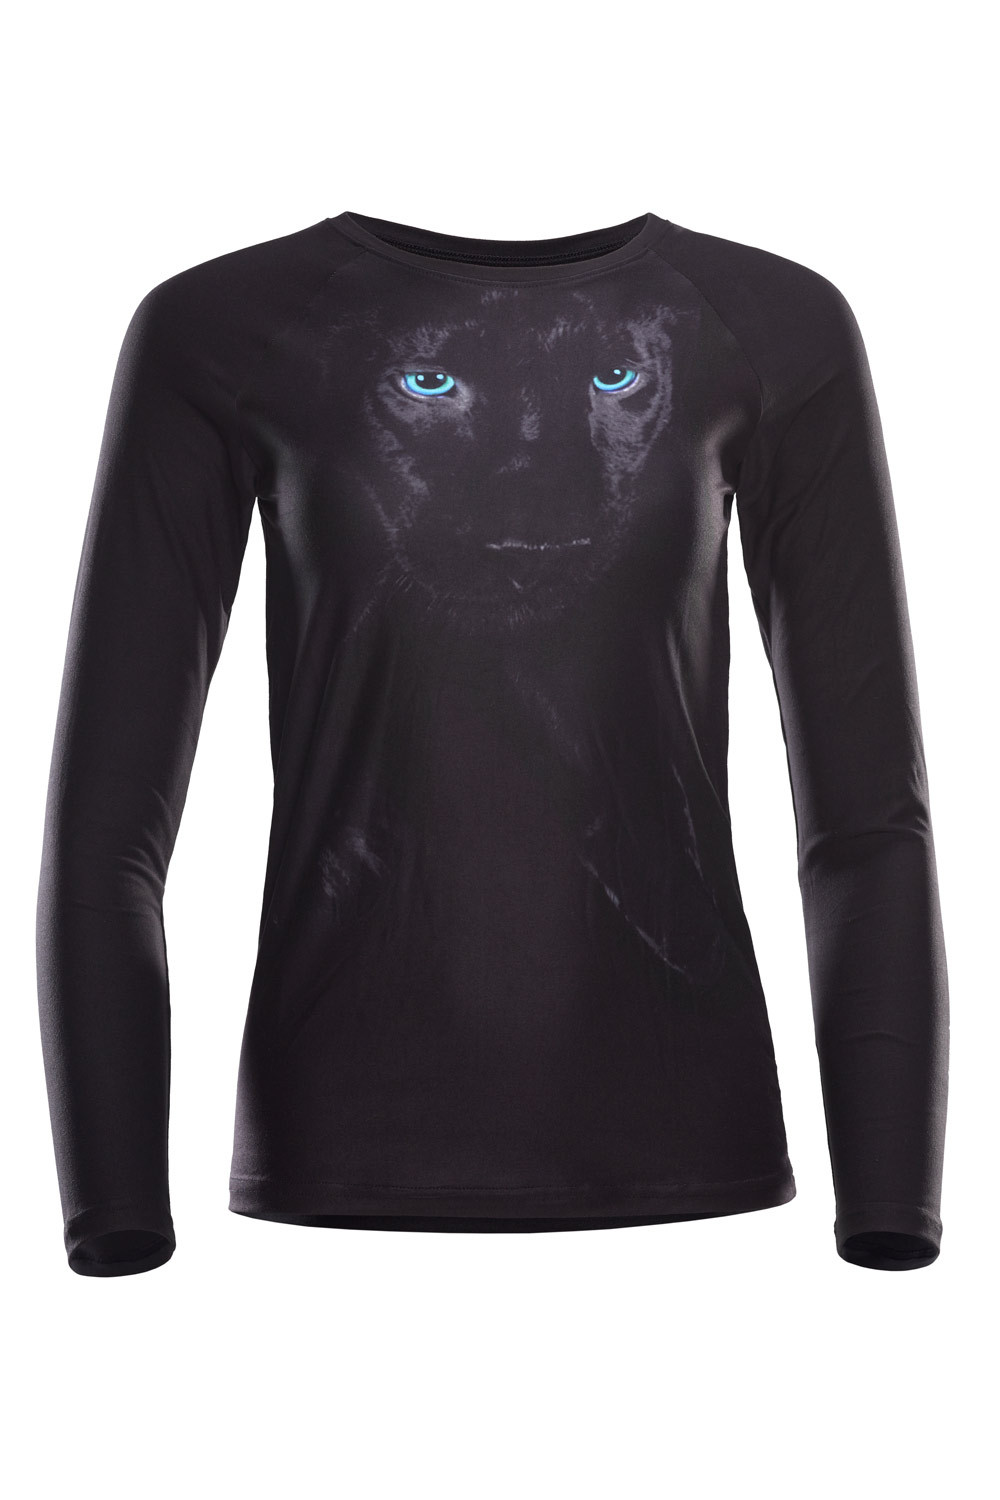 Functional Light and Sleeve Soft Ultra Soft AET120LS, Panther, Long Style Winshape Top